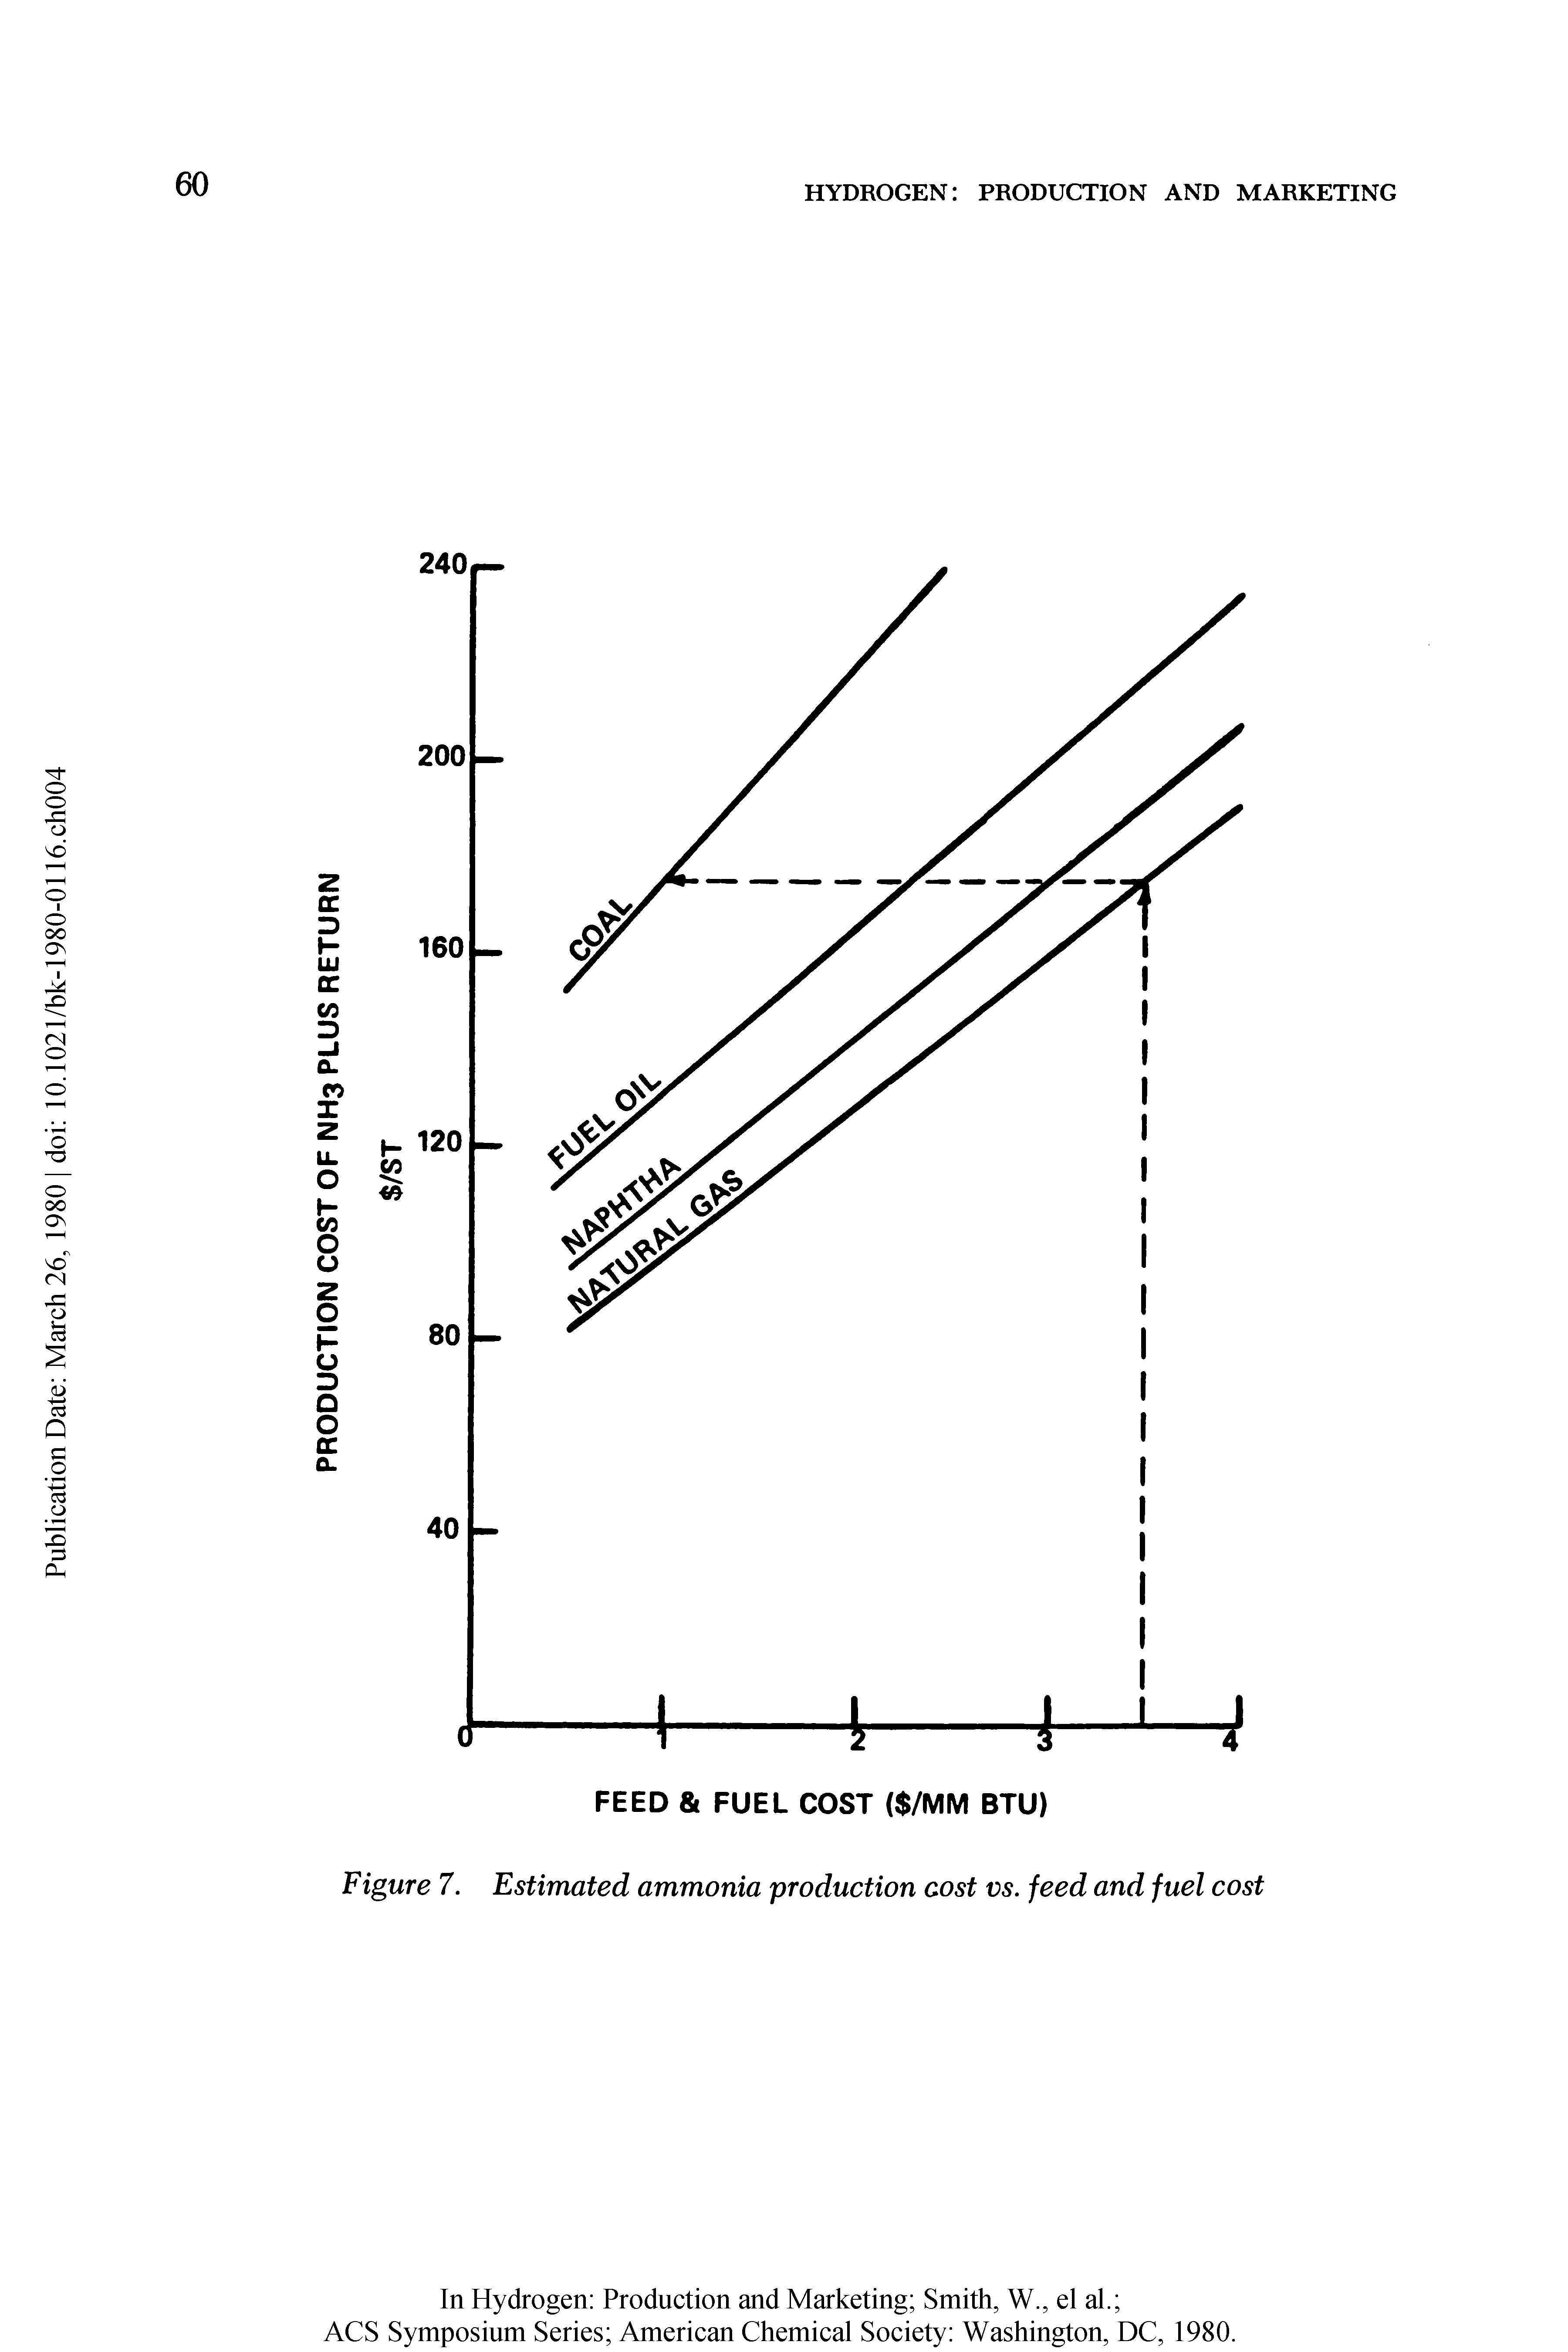 Figure 7. Estimated ammonia production cost vs. feed and fuel cost...